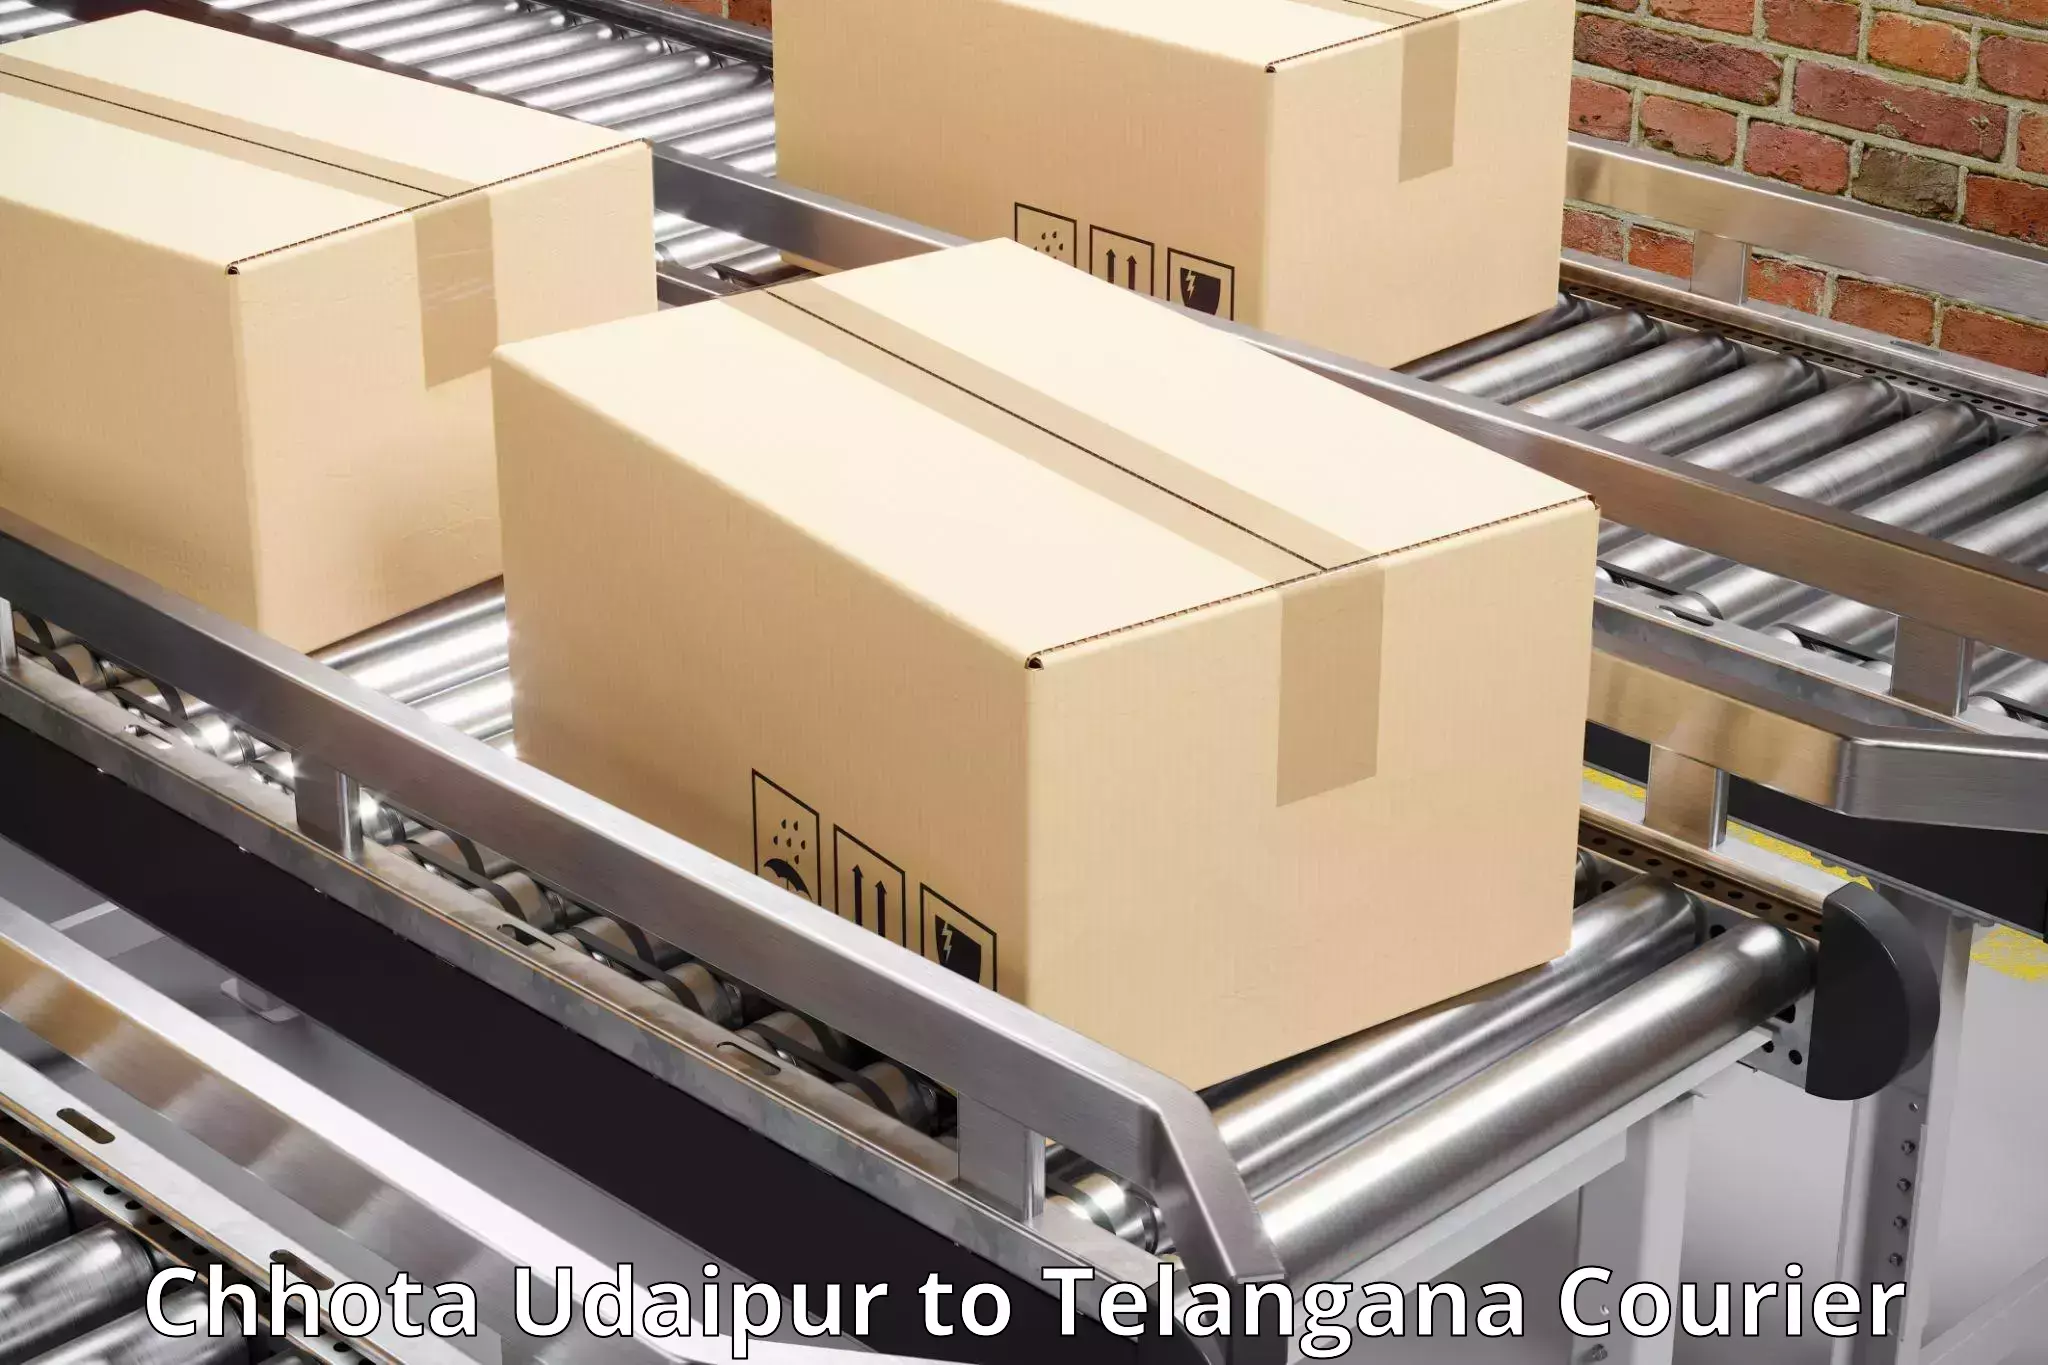 Secure package delivery Chhota Udaipur to Hyderabad